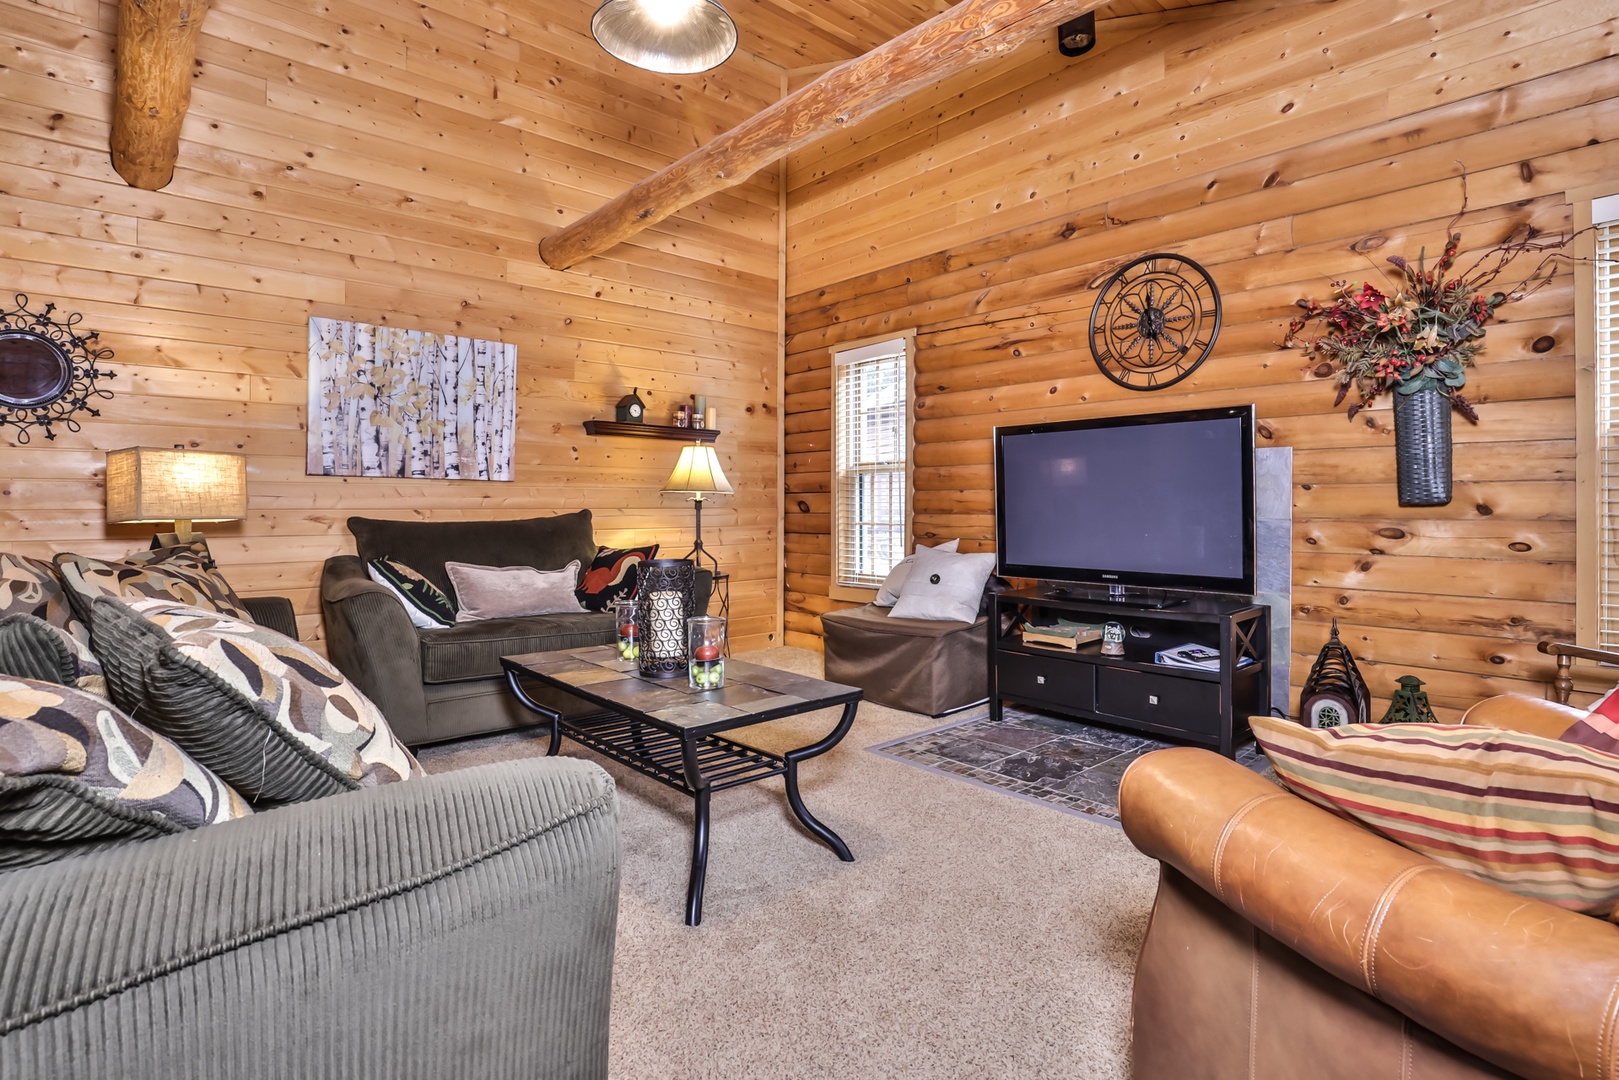 Lakeside Room - Wilderness Bay Lodge - Hiller Vacation Homes